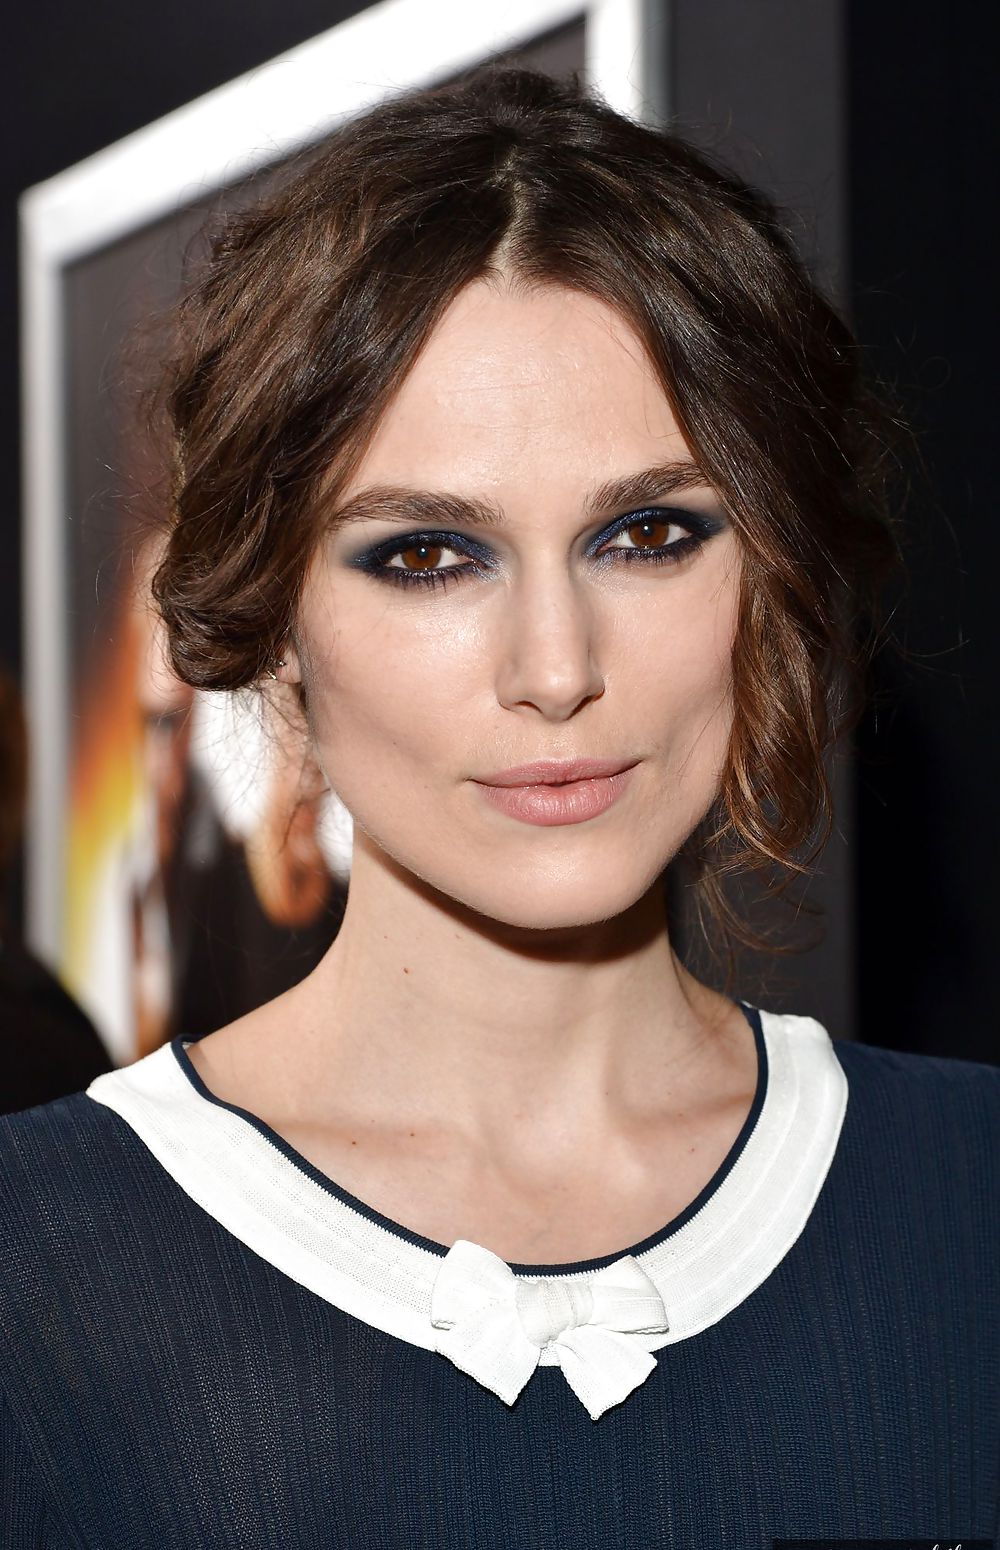 Keira Knightley The Royal Lady of England #35650215